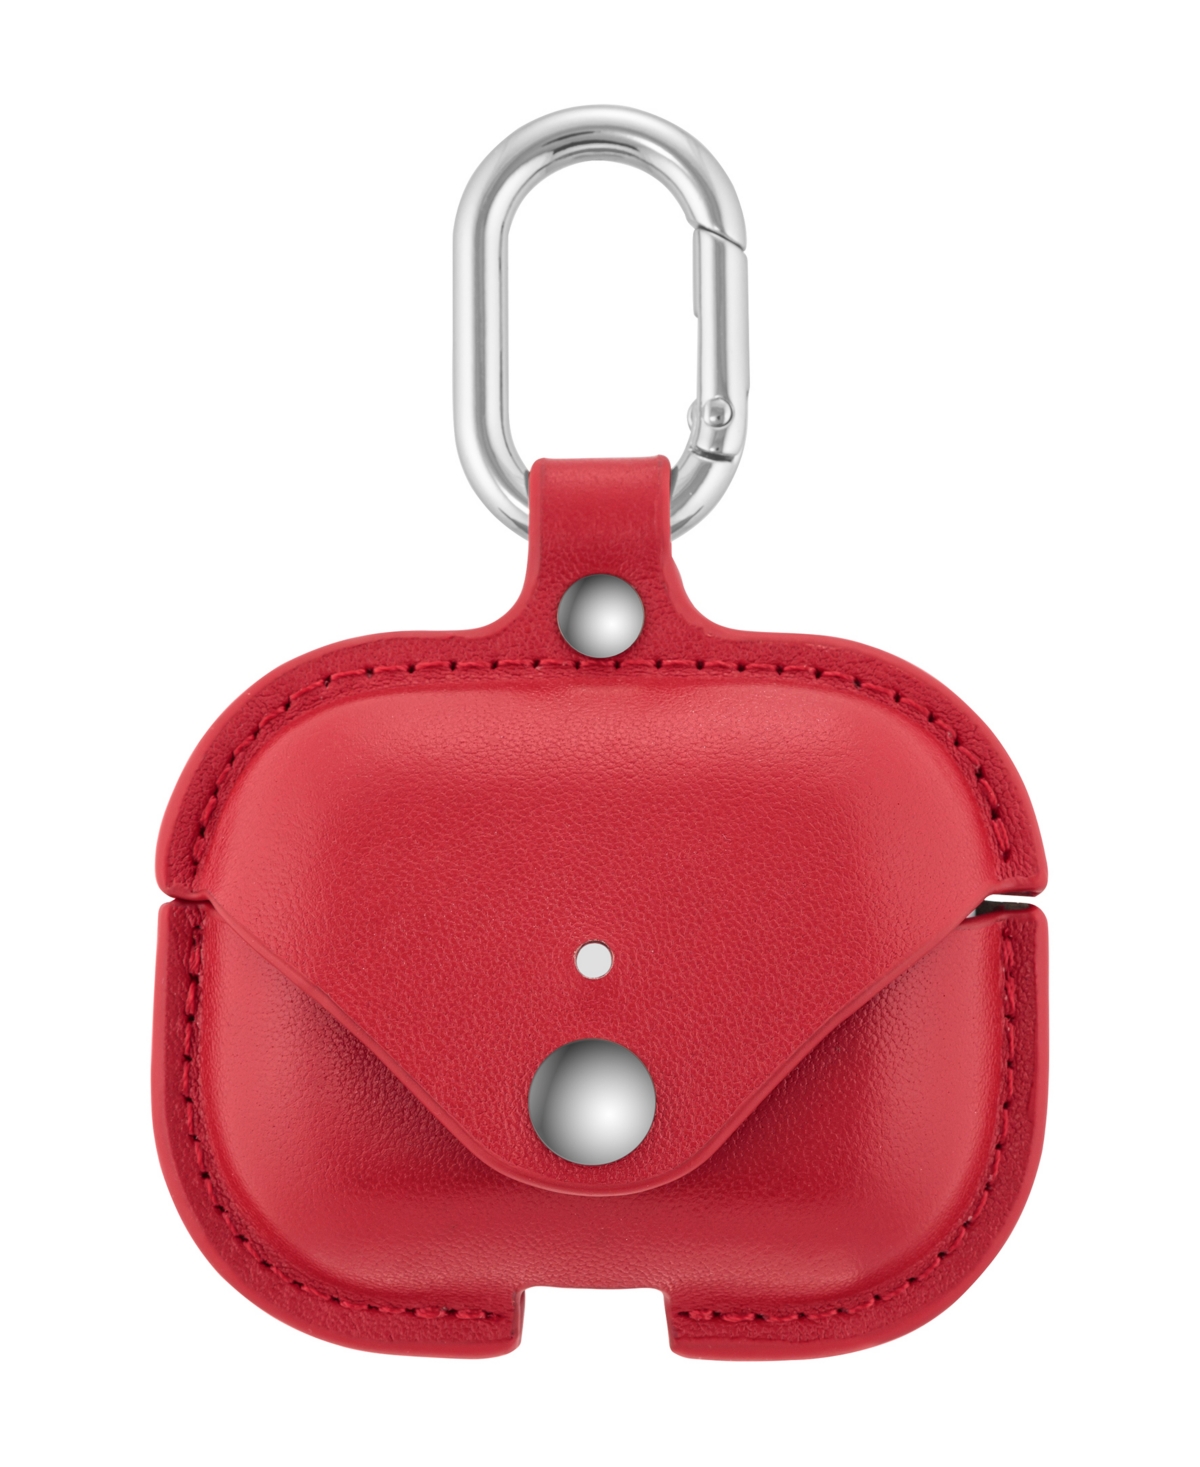 Red Leather AirPods Case with Silver-Tone Snap Closure and Carabiner Clip - Red, Silver-Tone